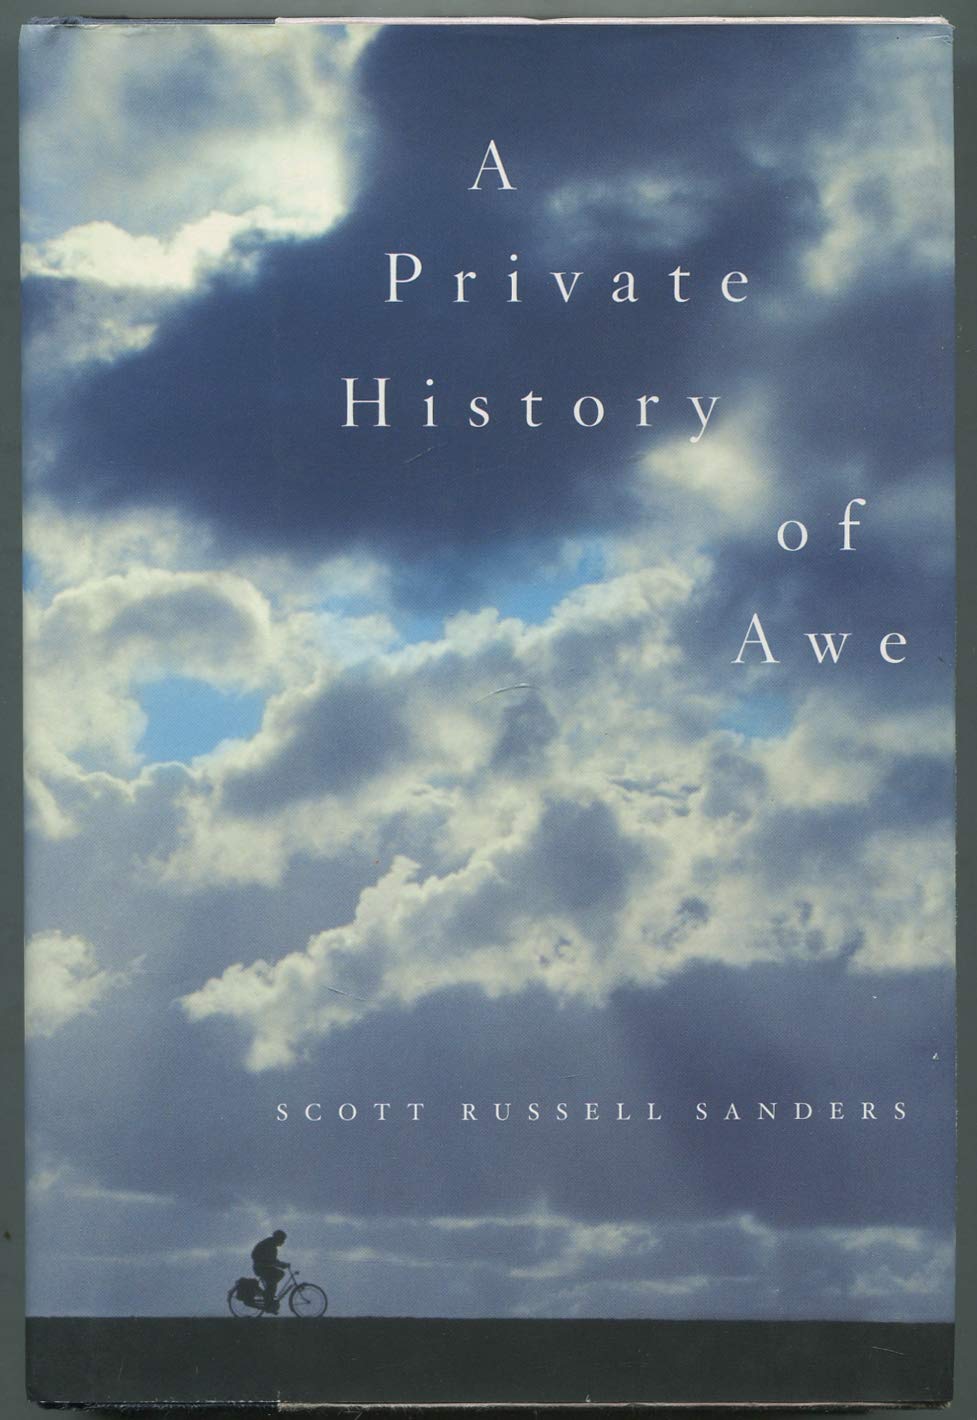 A Private History of Awe